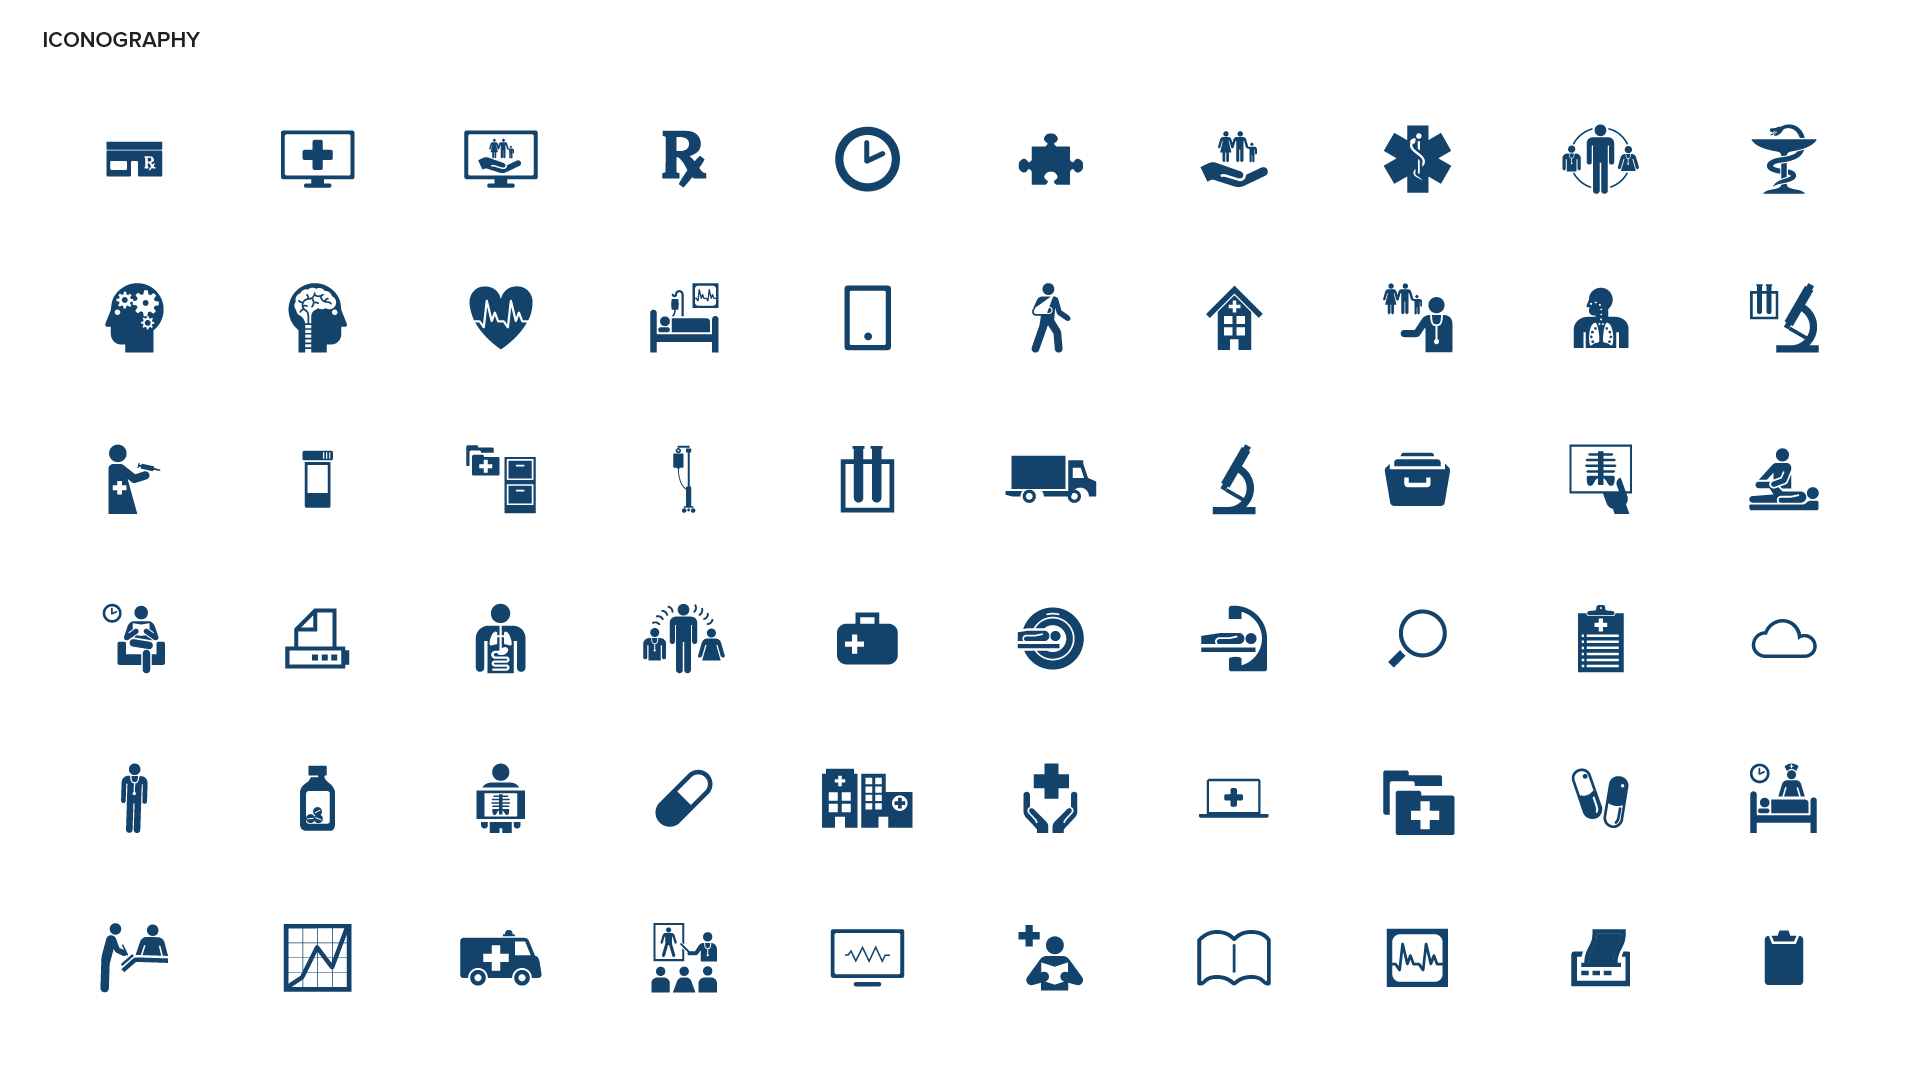 02-04-guide_highlights-iconography